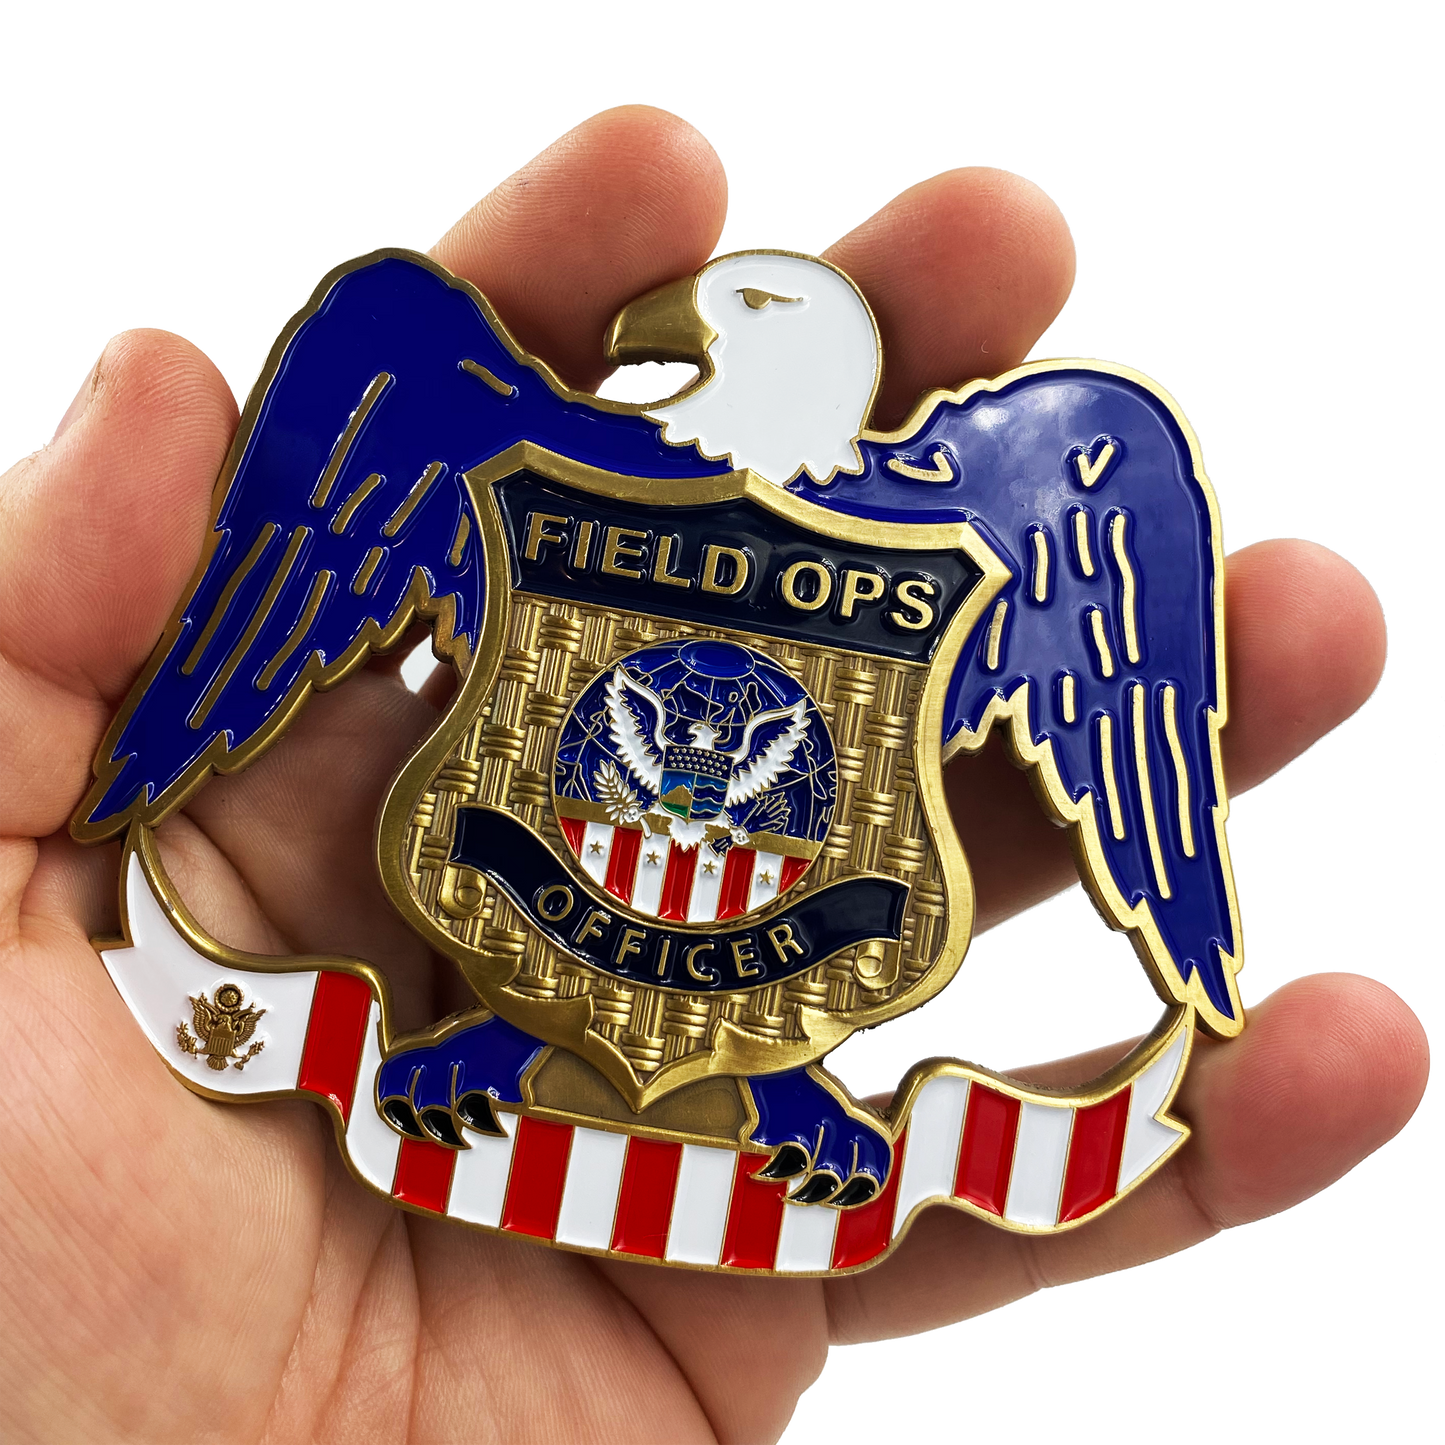 DL11-10 Field Operations huge vintage inspired CBP Field Ops US Customs Challenge Coin Eagle Flag 4 inch